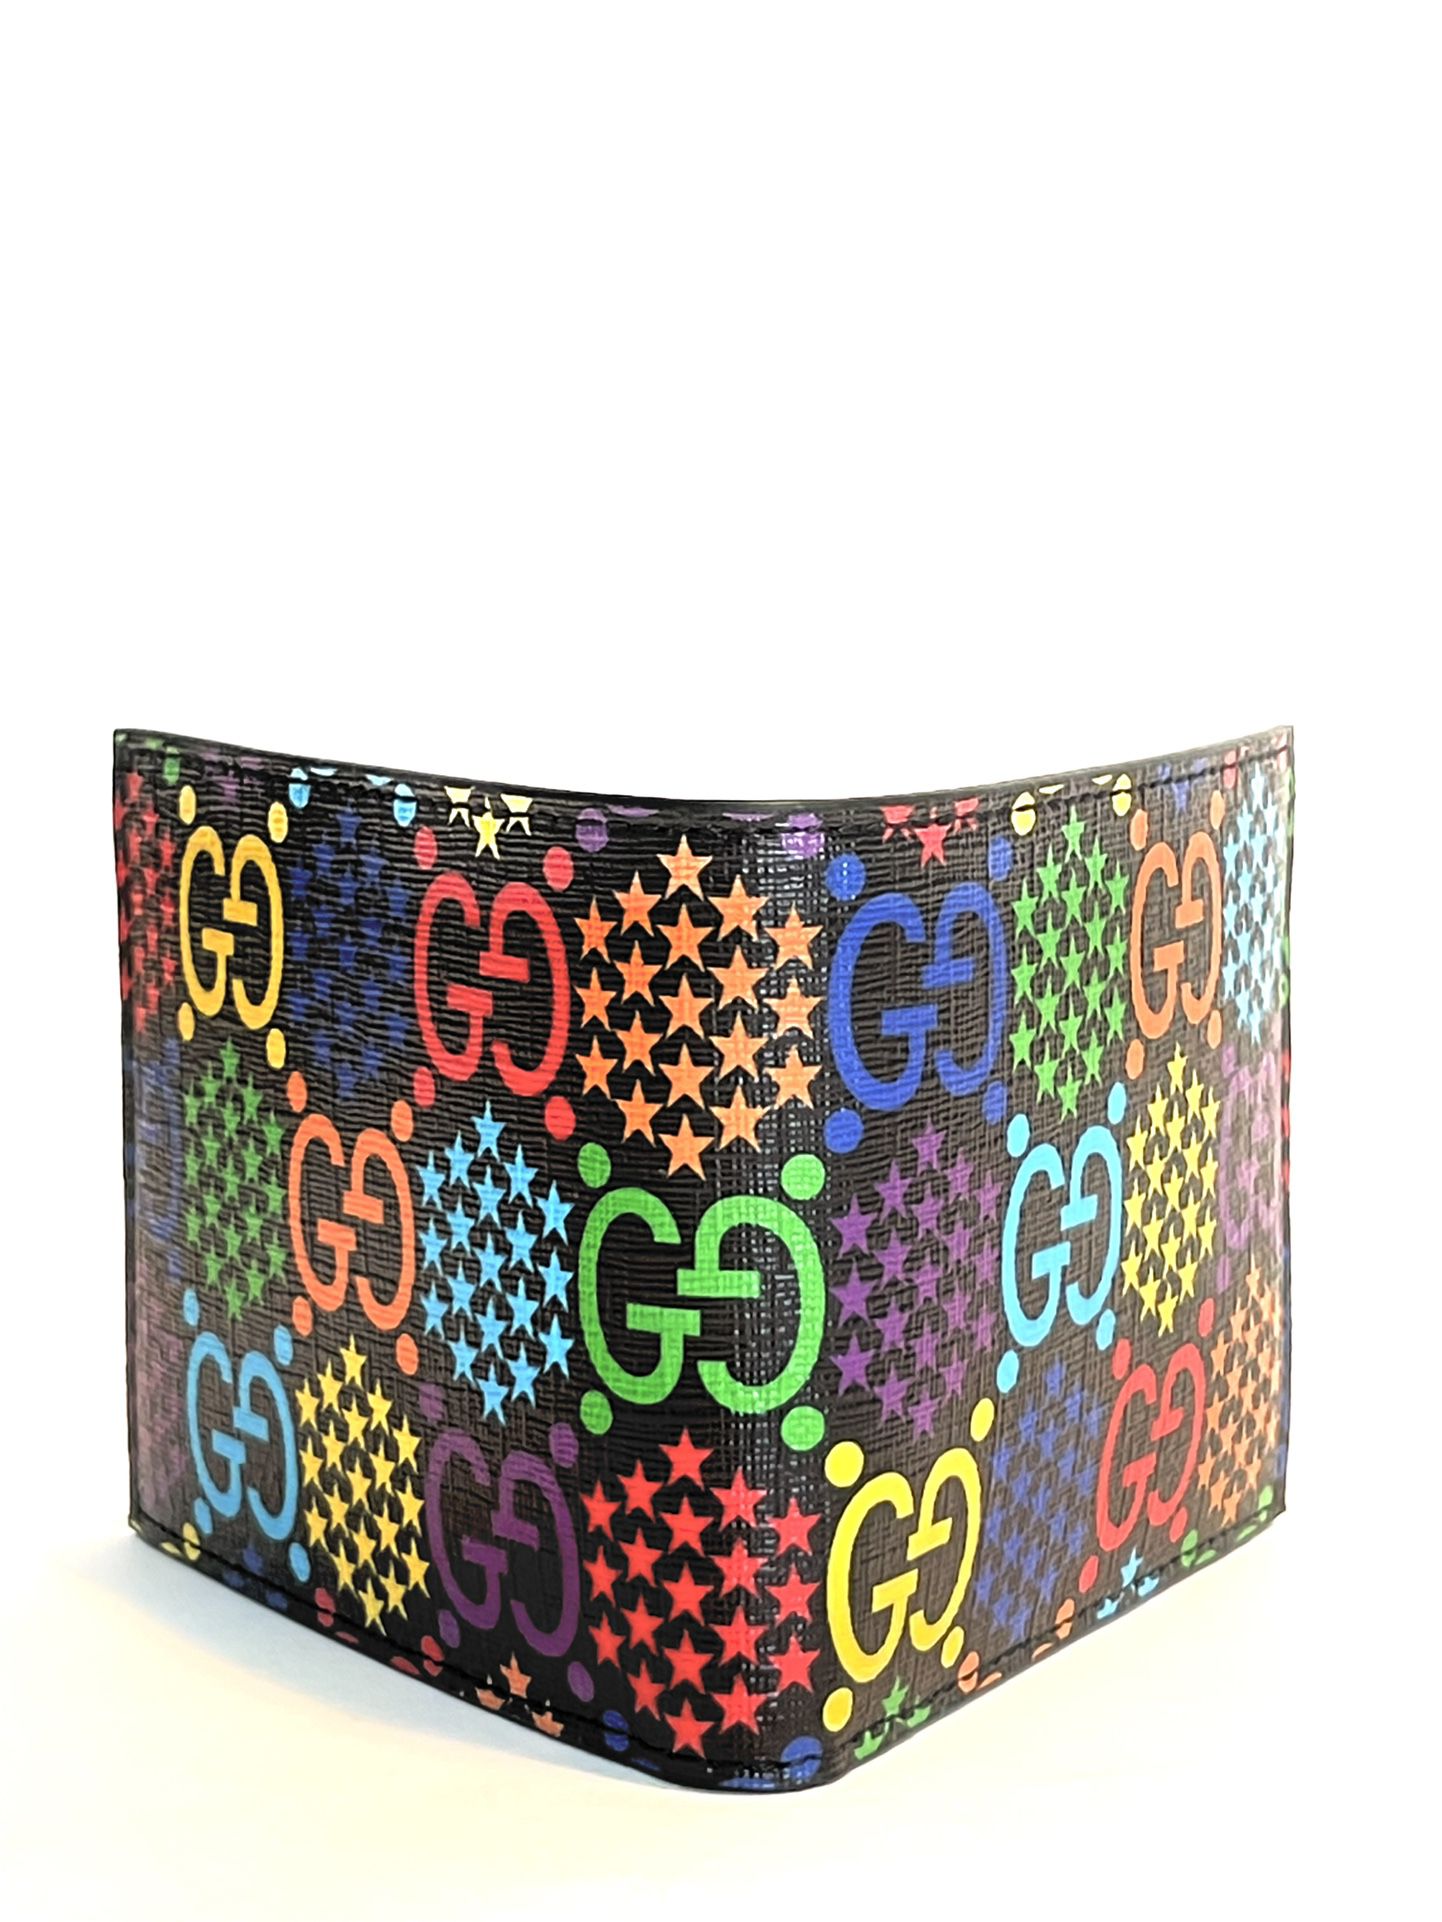  Brand NEW GUCCI wallet-  Mens 2020 Psychedelic edition